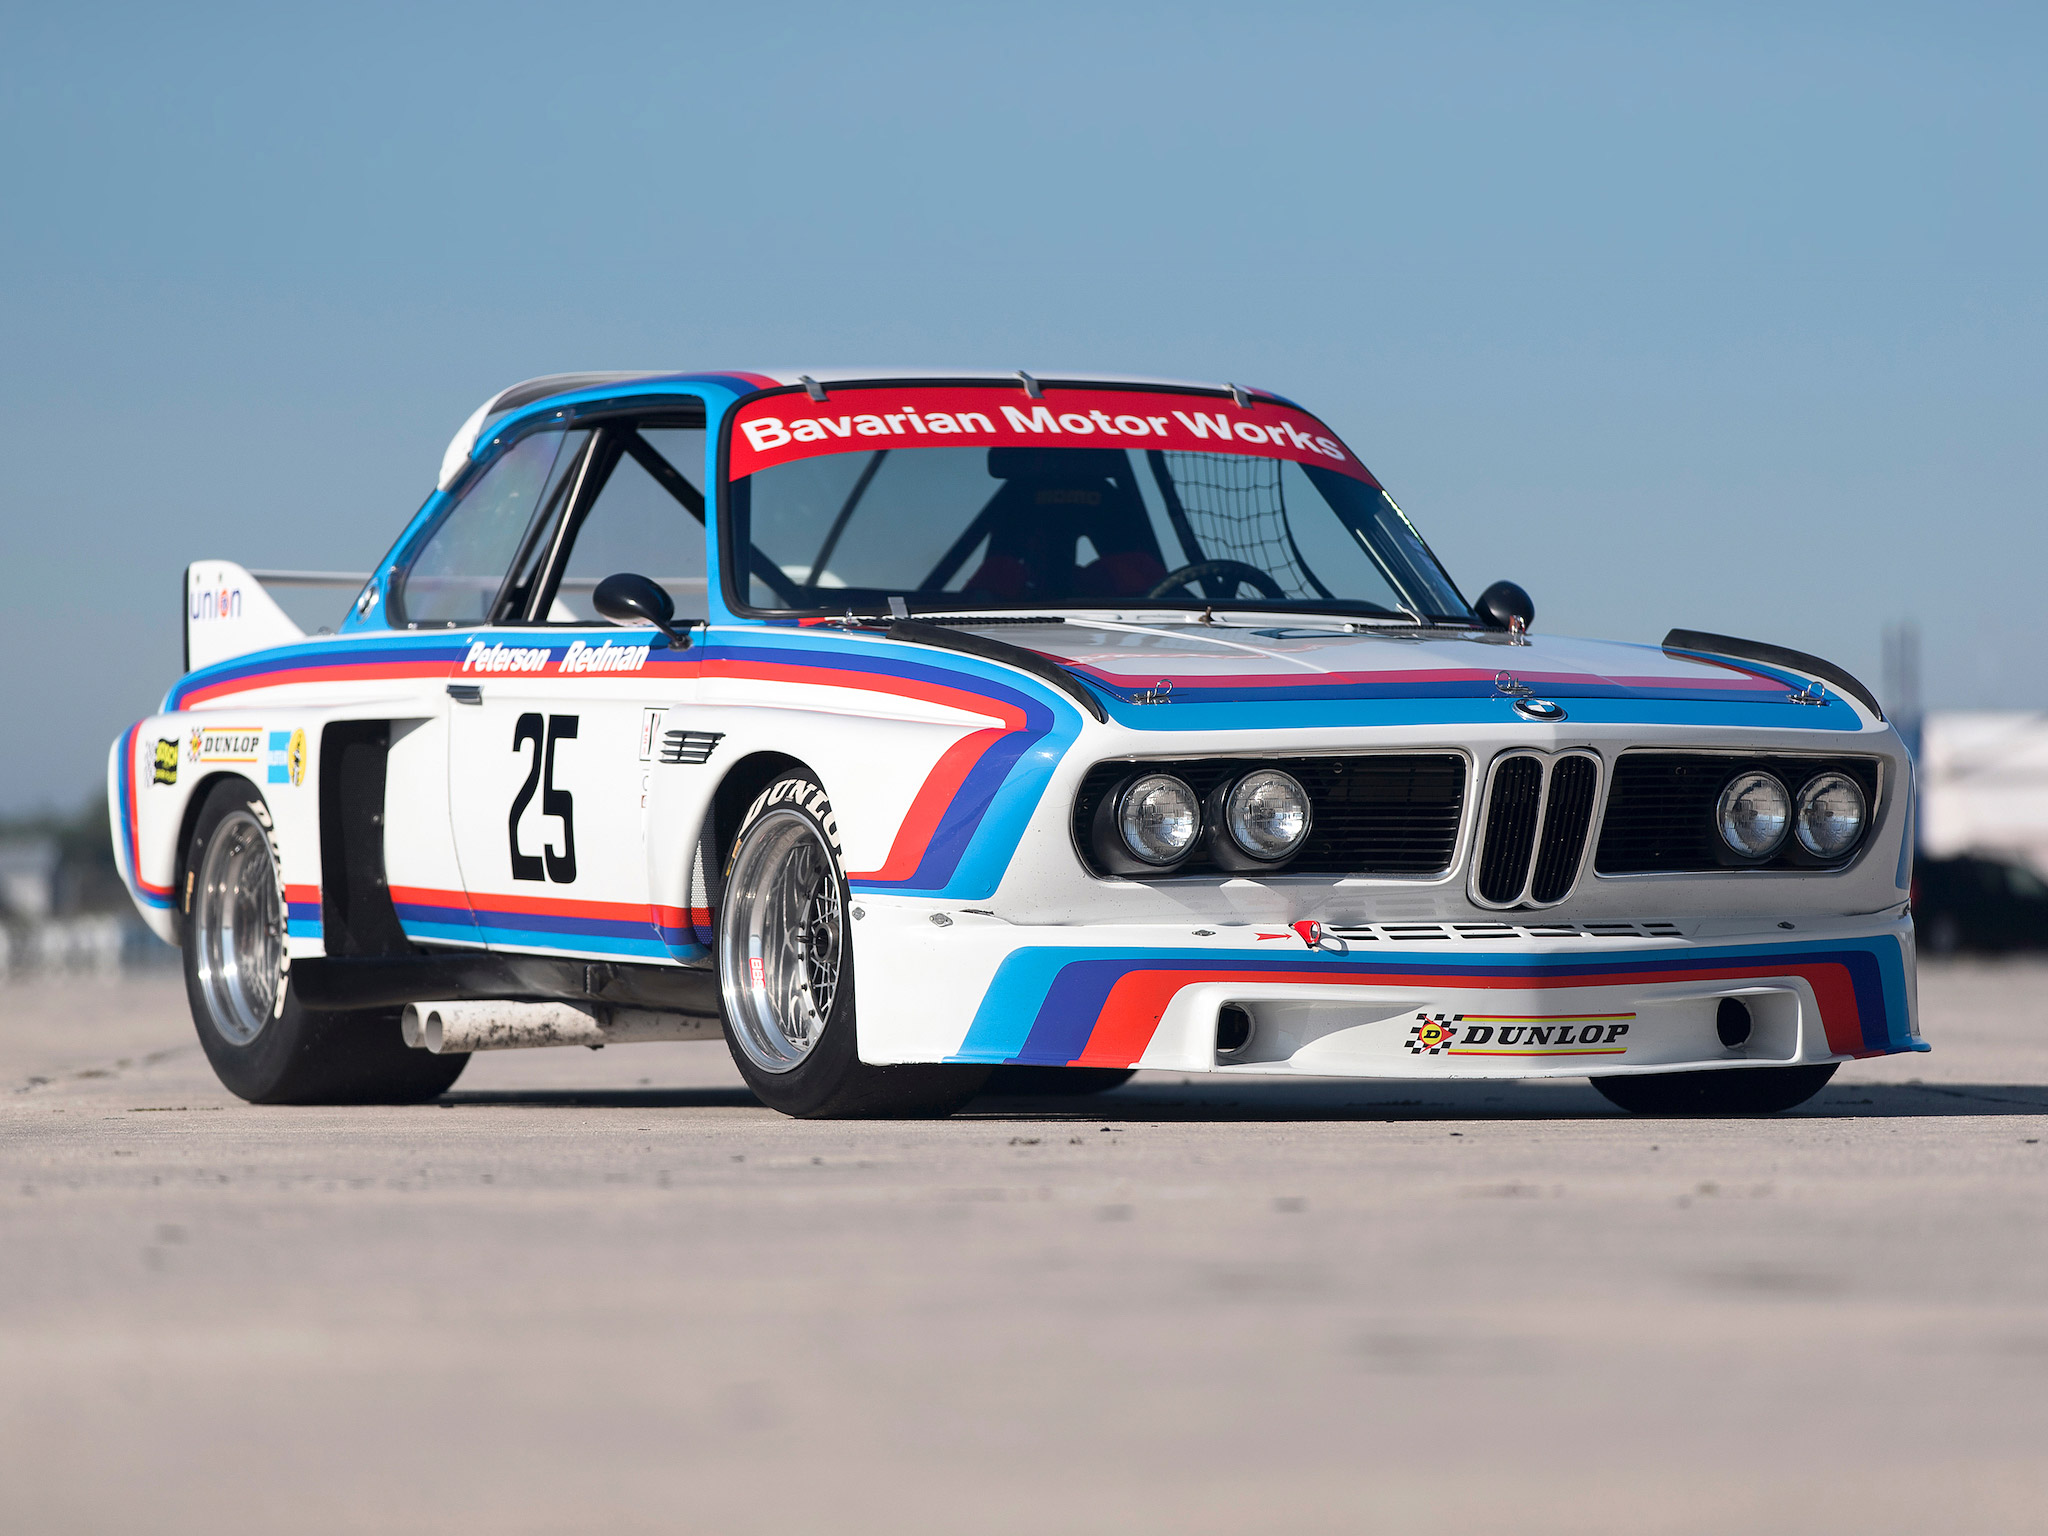 Bmw 3.0 Csl Wallpapers